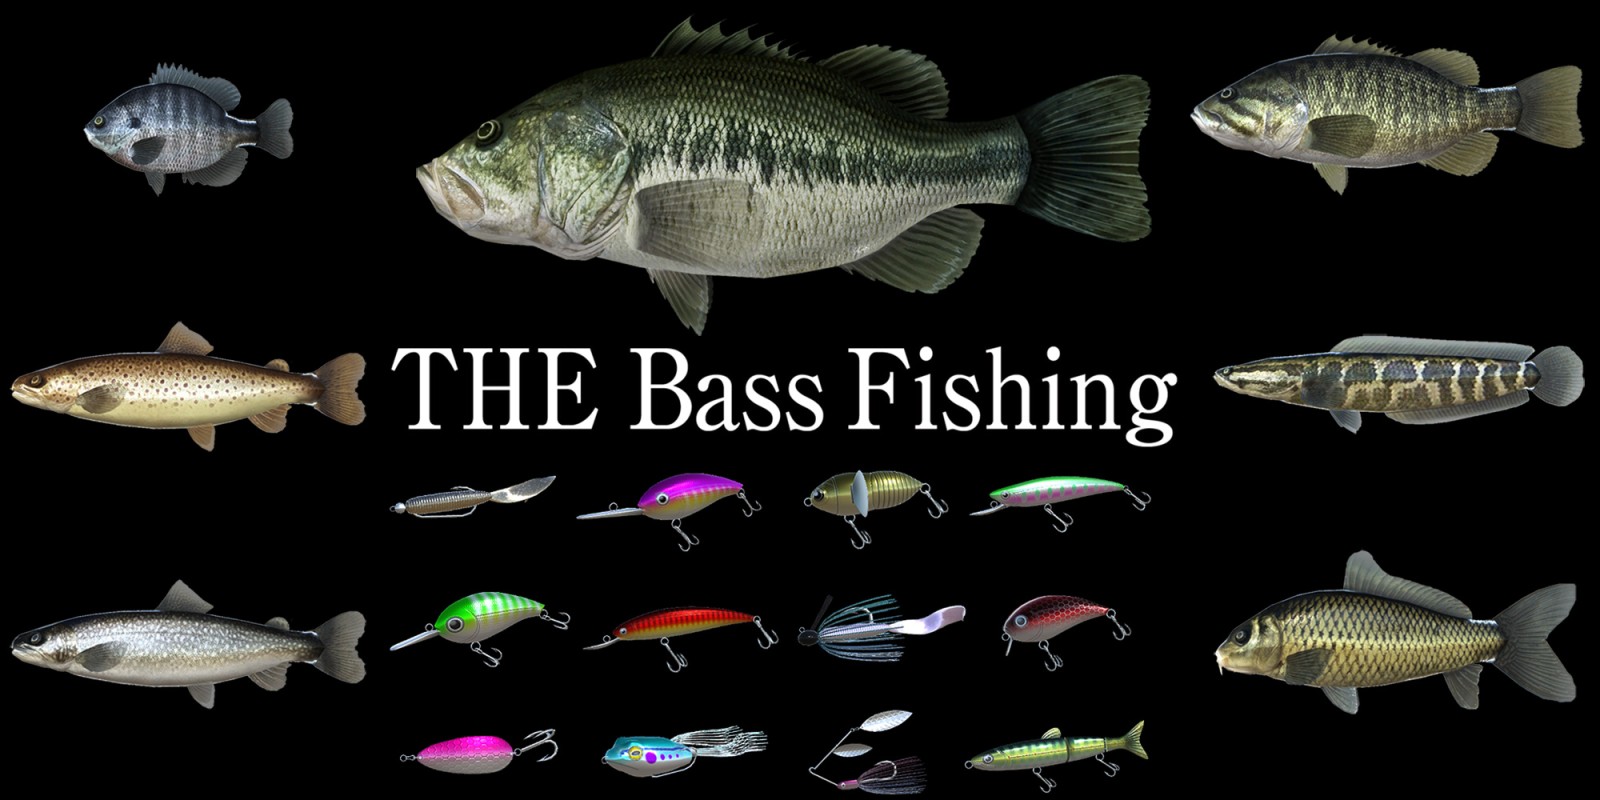 https://fs-prod-cdn.nintendo-europe.com/media/images/10_share_images/games_15/nintendo_switch_download_software_1/2x1_NSwitchDS_TheBassFishing_image1600w.jpg